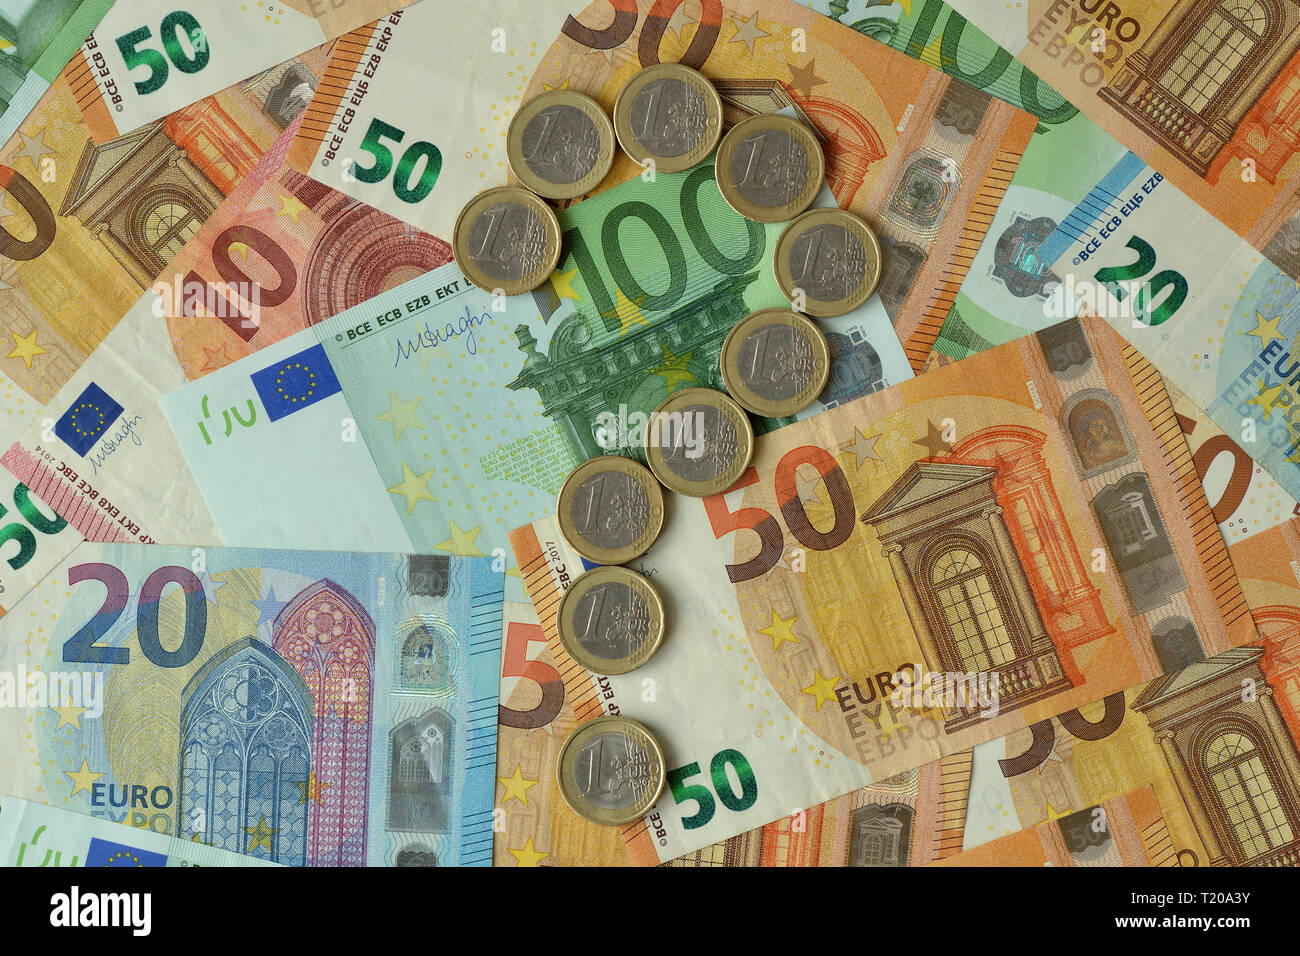 Question mark made of euro coins on euro banknotes background - Concept of financial uncertainty, crisis and uncertain future of euro Stock Photo